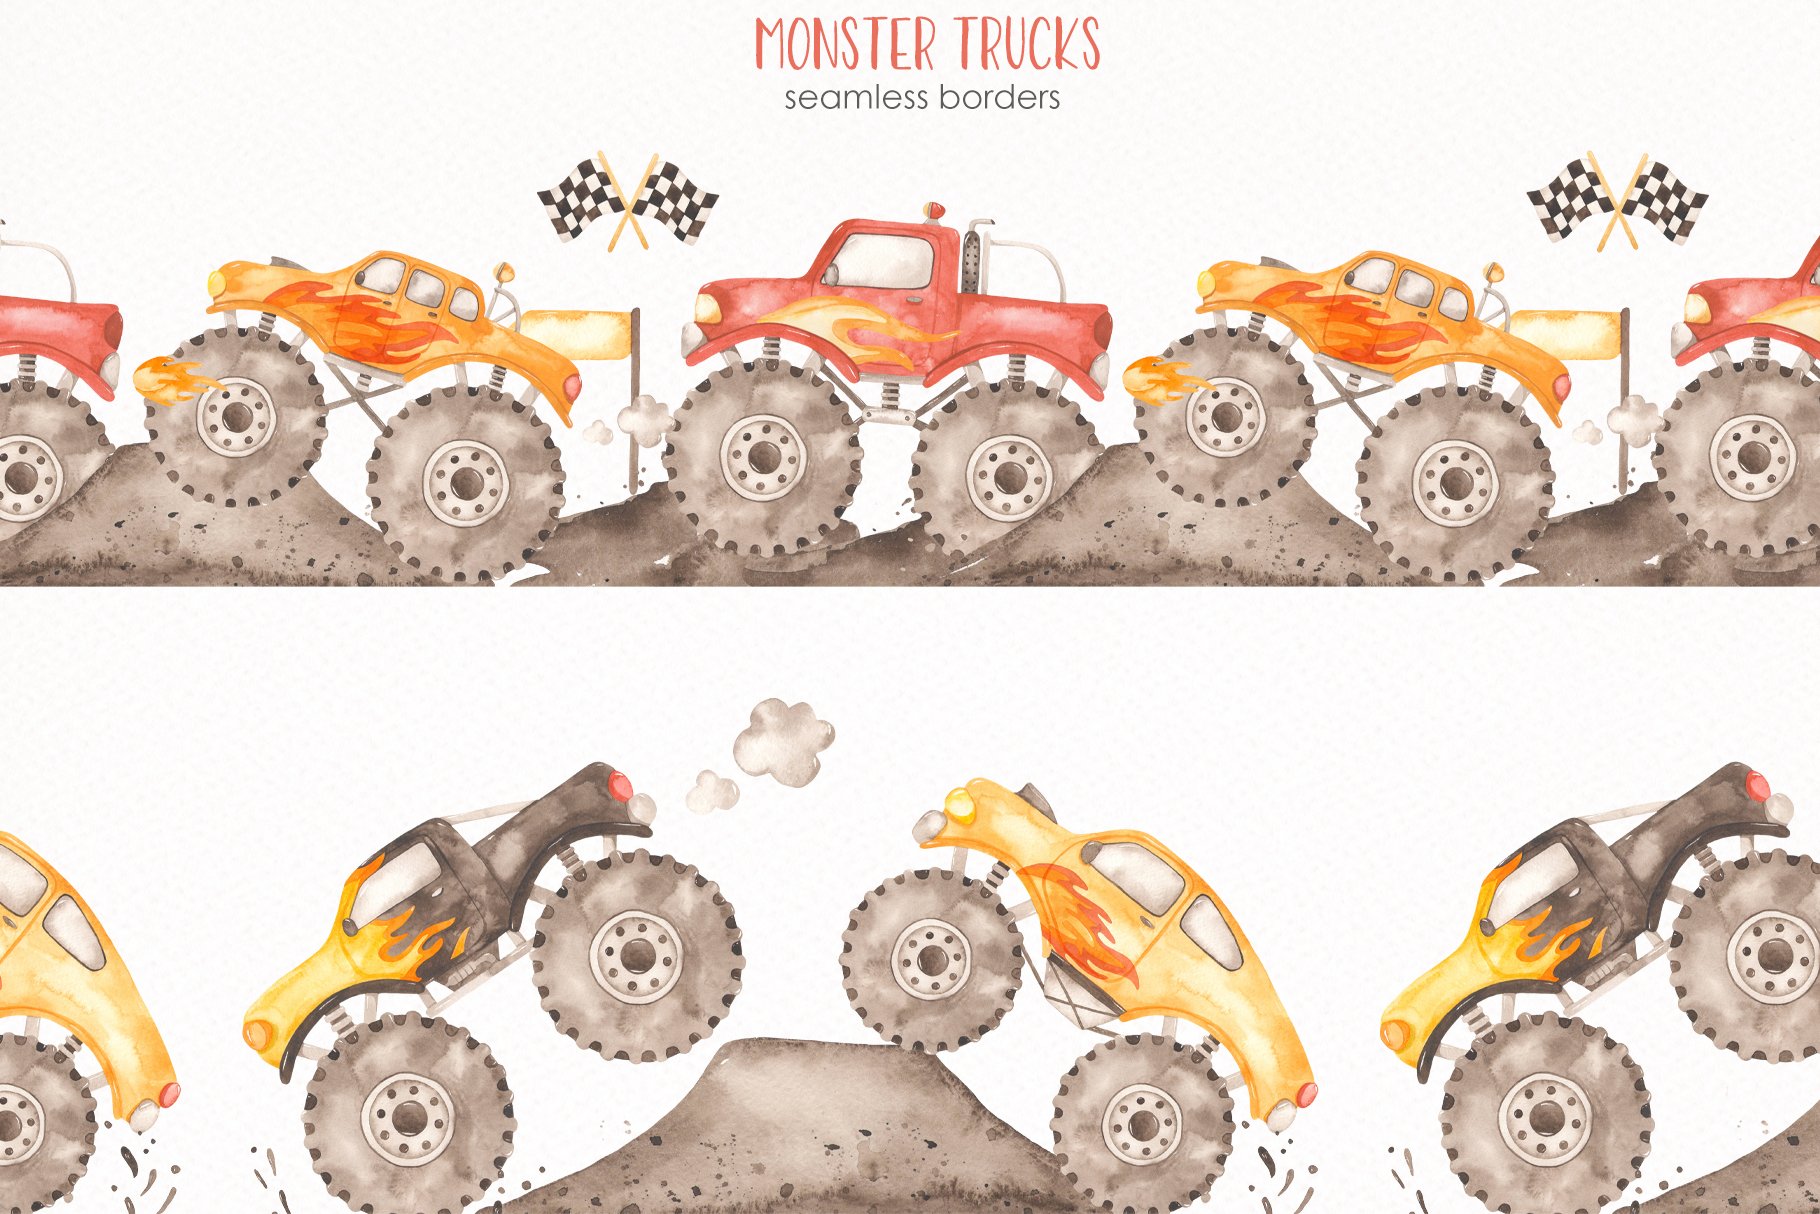 Two options os situations with the monster trucks.